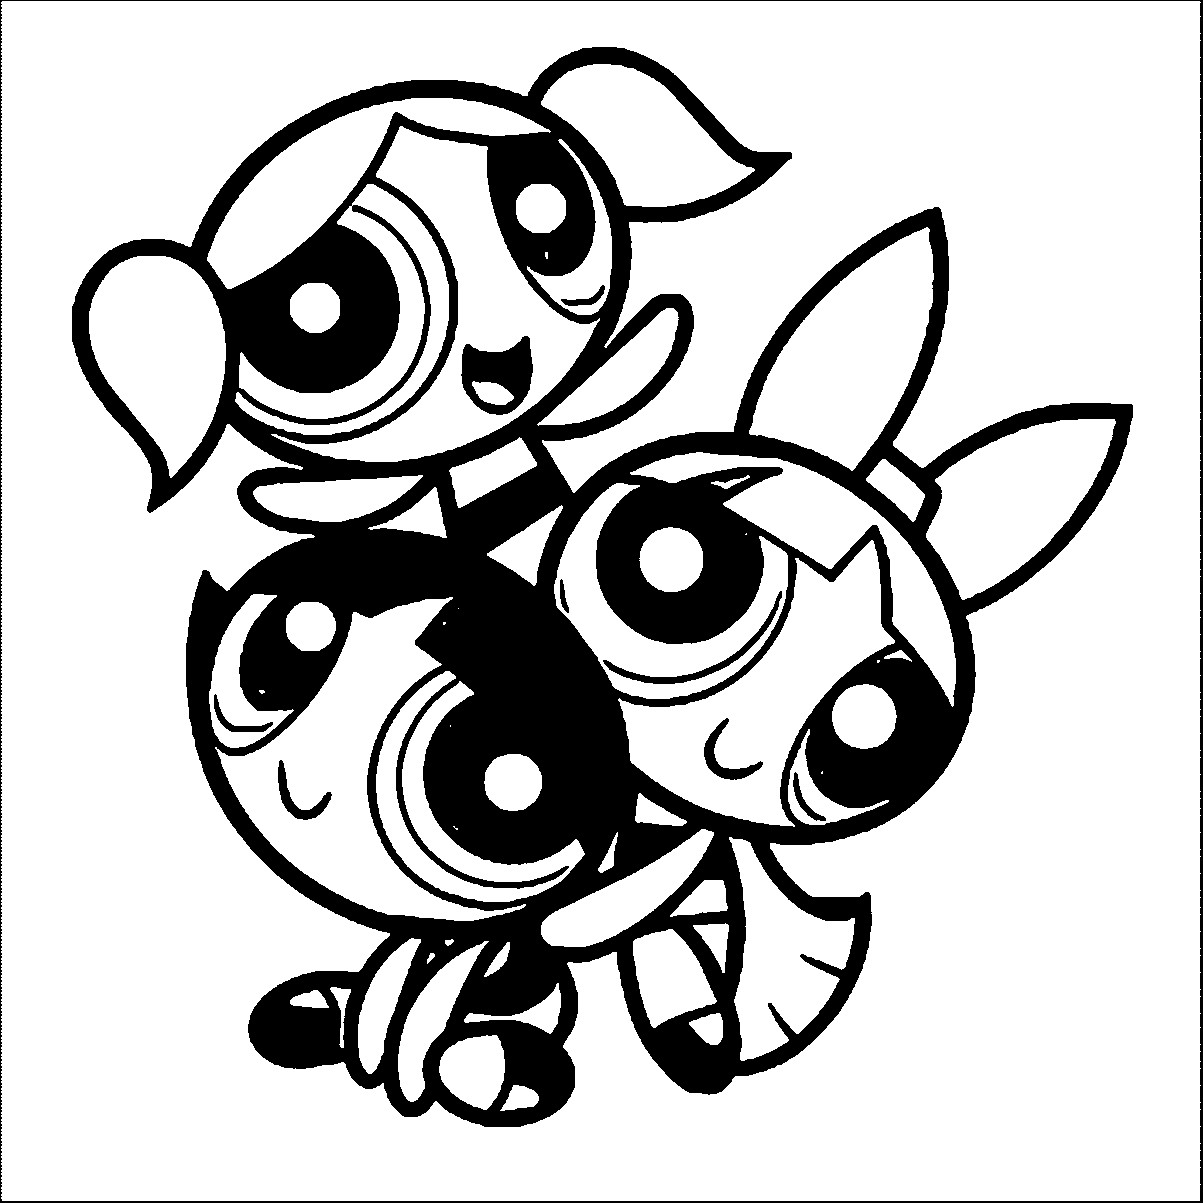 Powerpuff Girls Brothers Coloring Pages
 Powerpuff Girls Coloring Pages Coloring